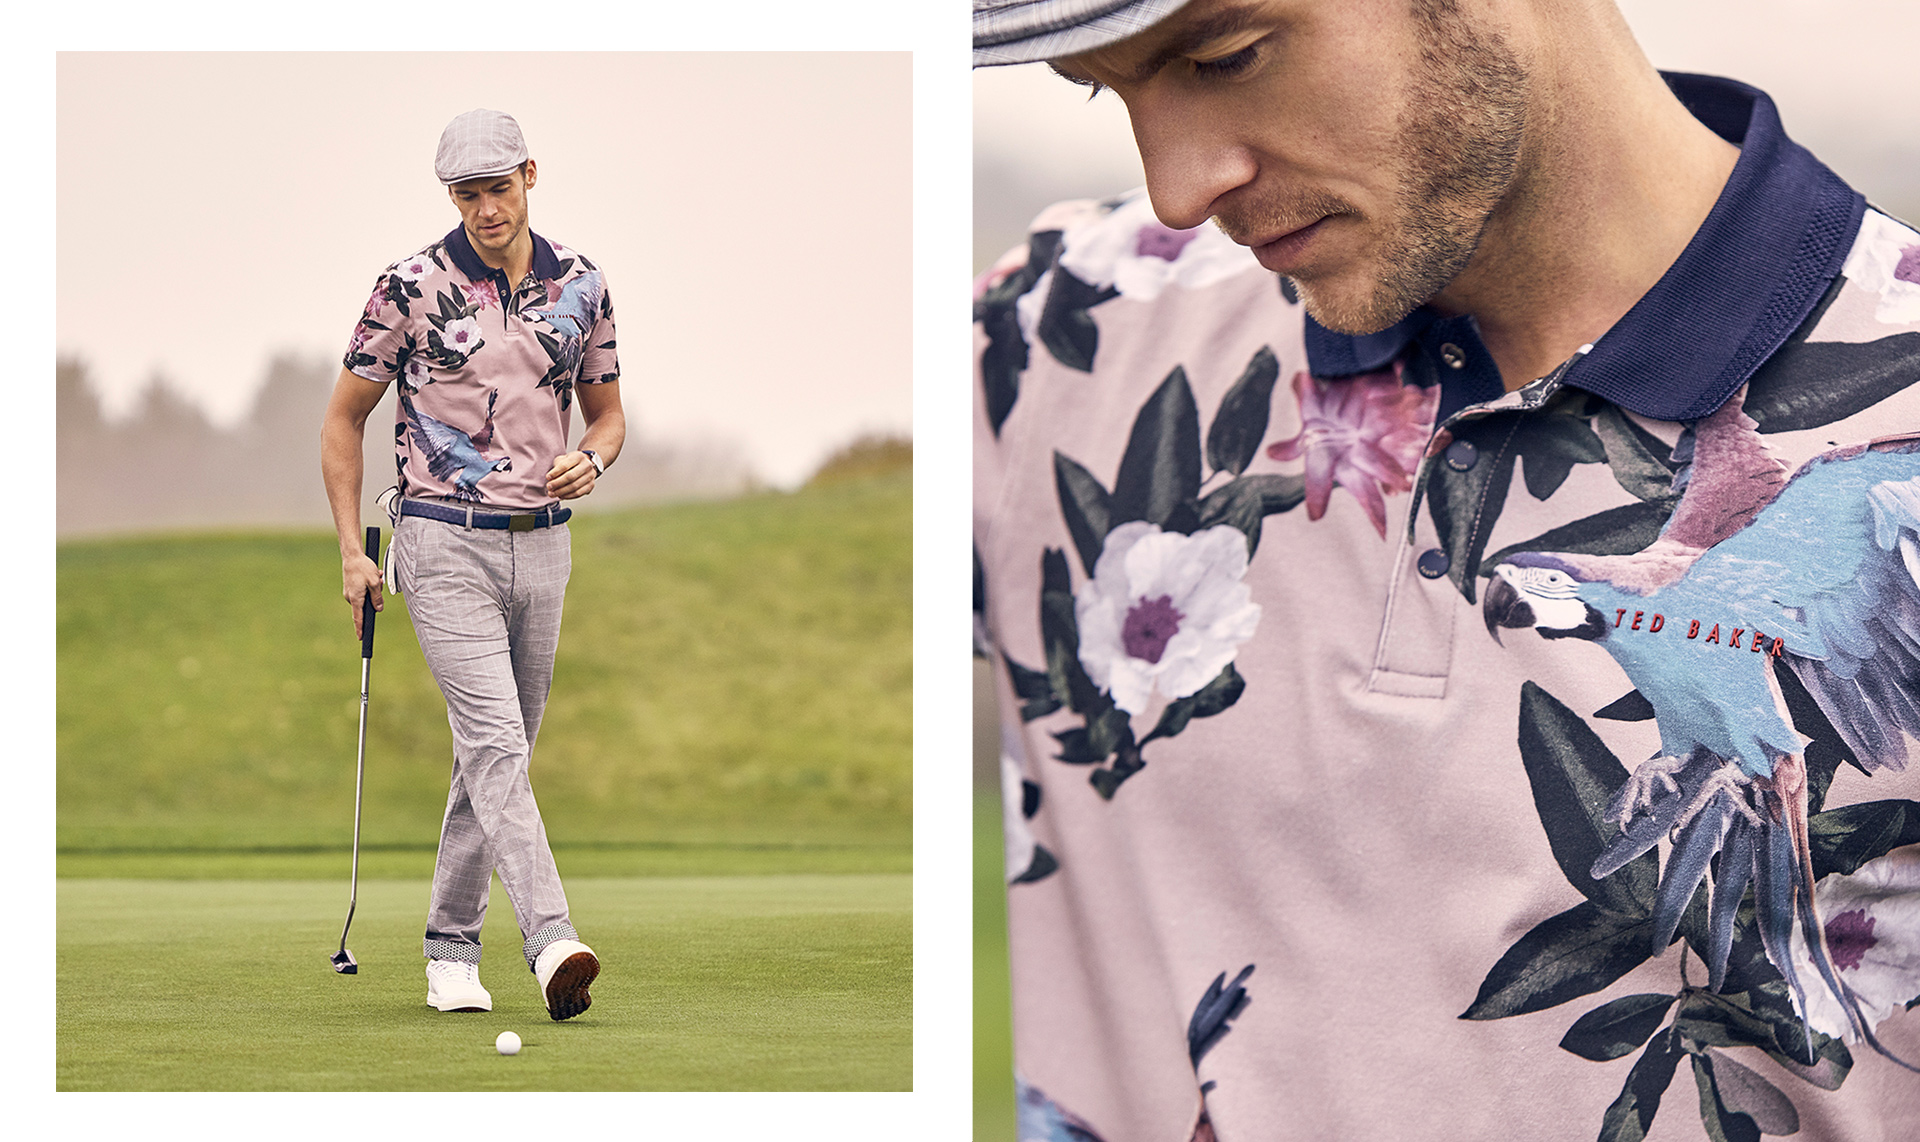 1_Ted_baker_golf_retouching_photography_sport_fashion